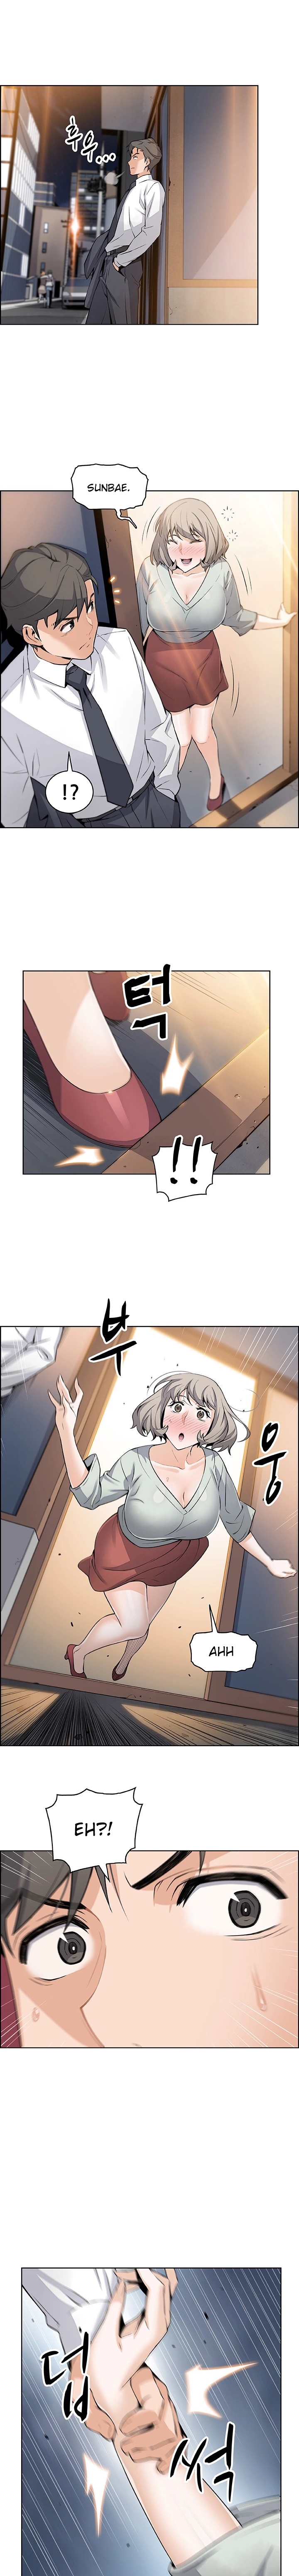 Housekeeper Manhwa - Chapter 15 Page 17